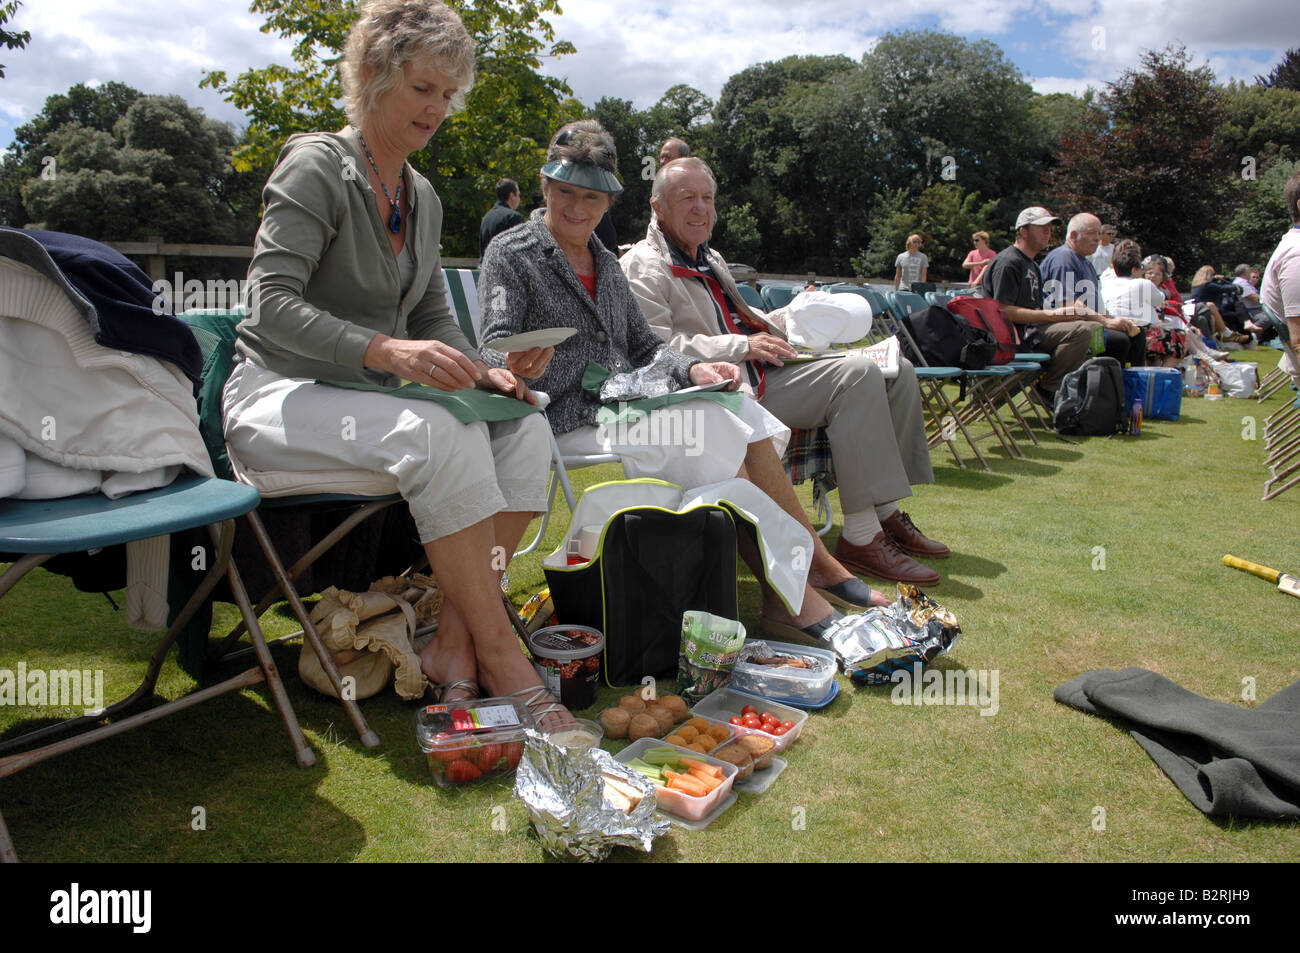 Spectators enjoy a picnic at a Sussex cricket match in Arundel Sussex UK Stock Photo